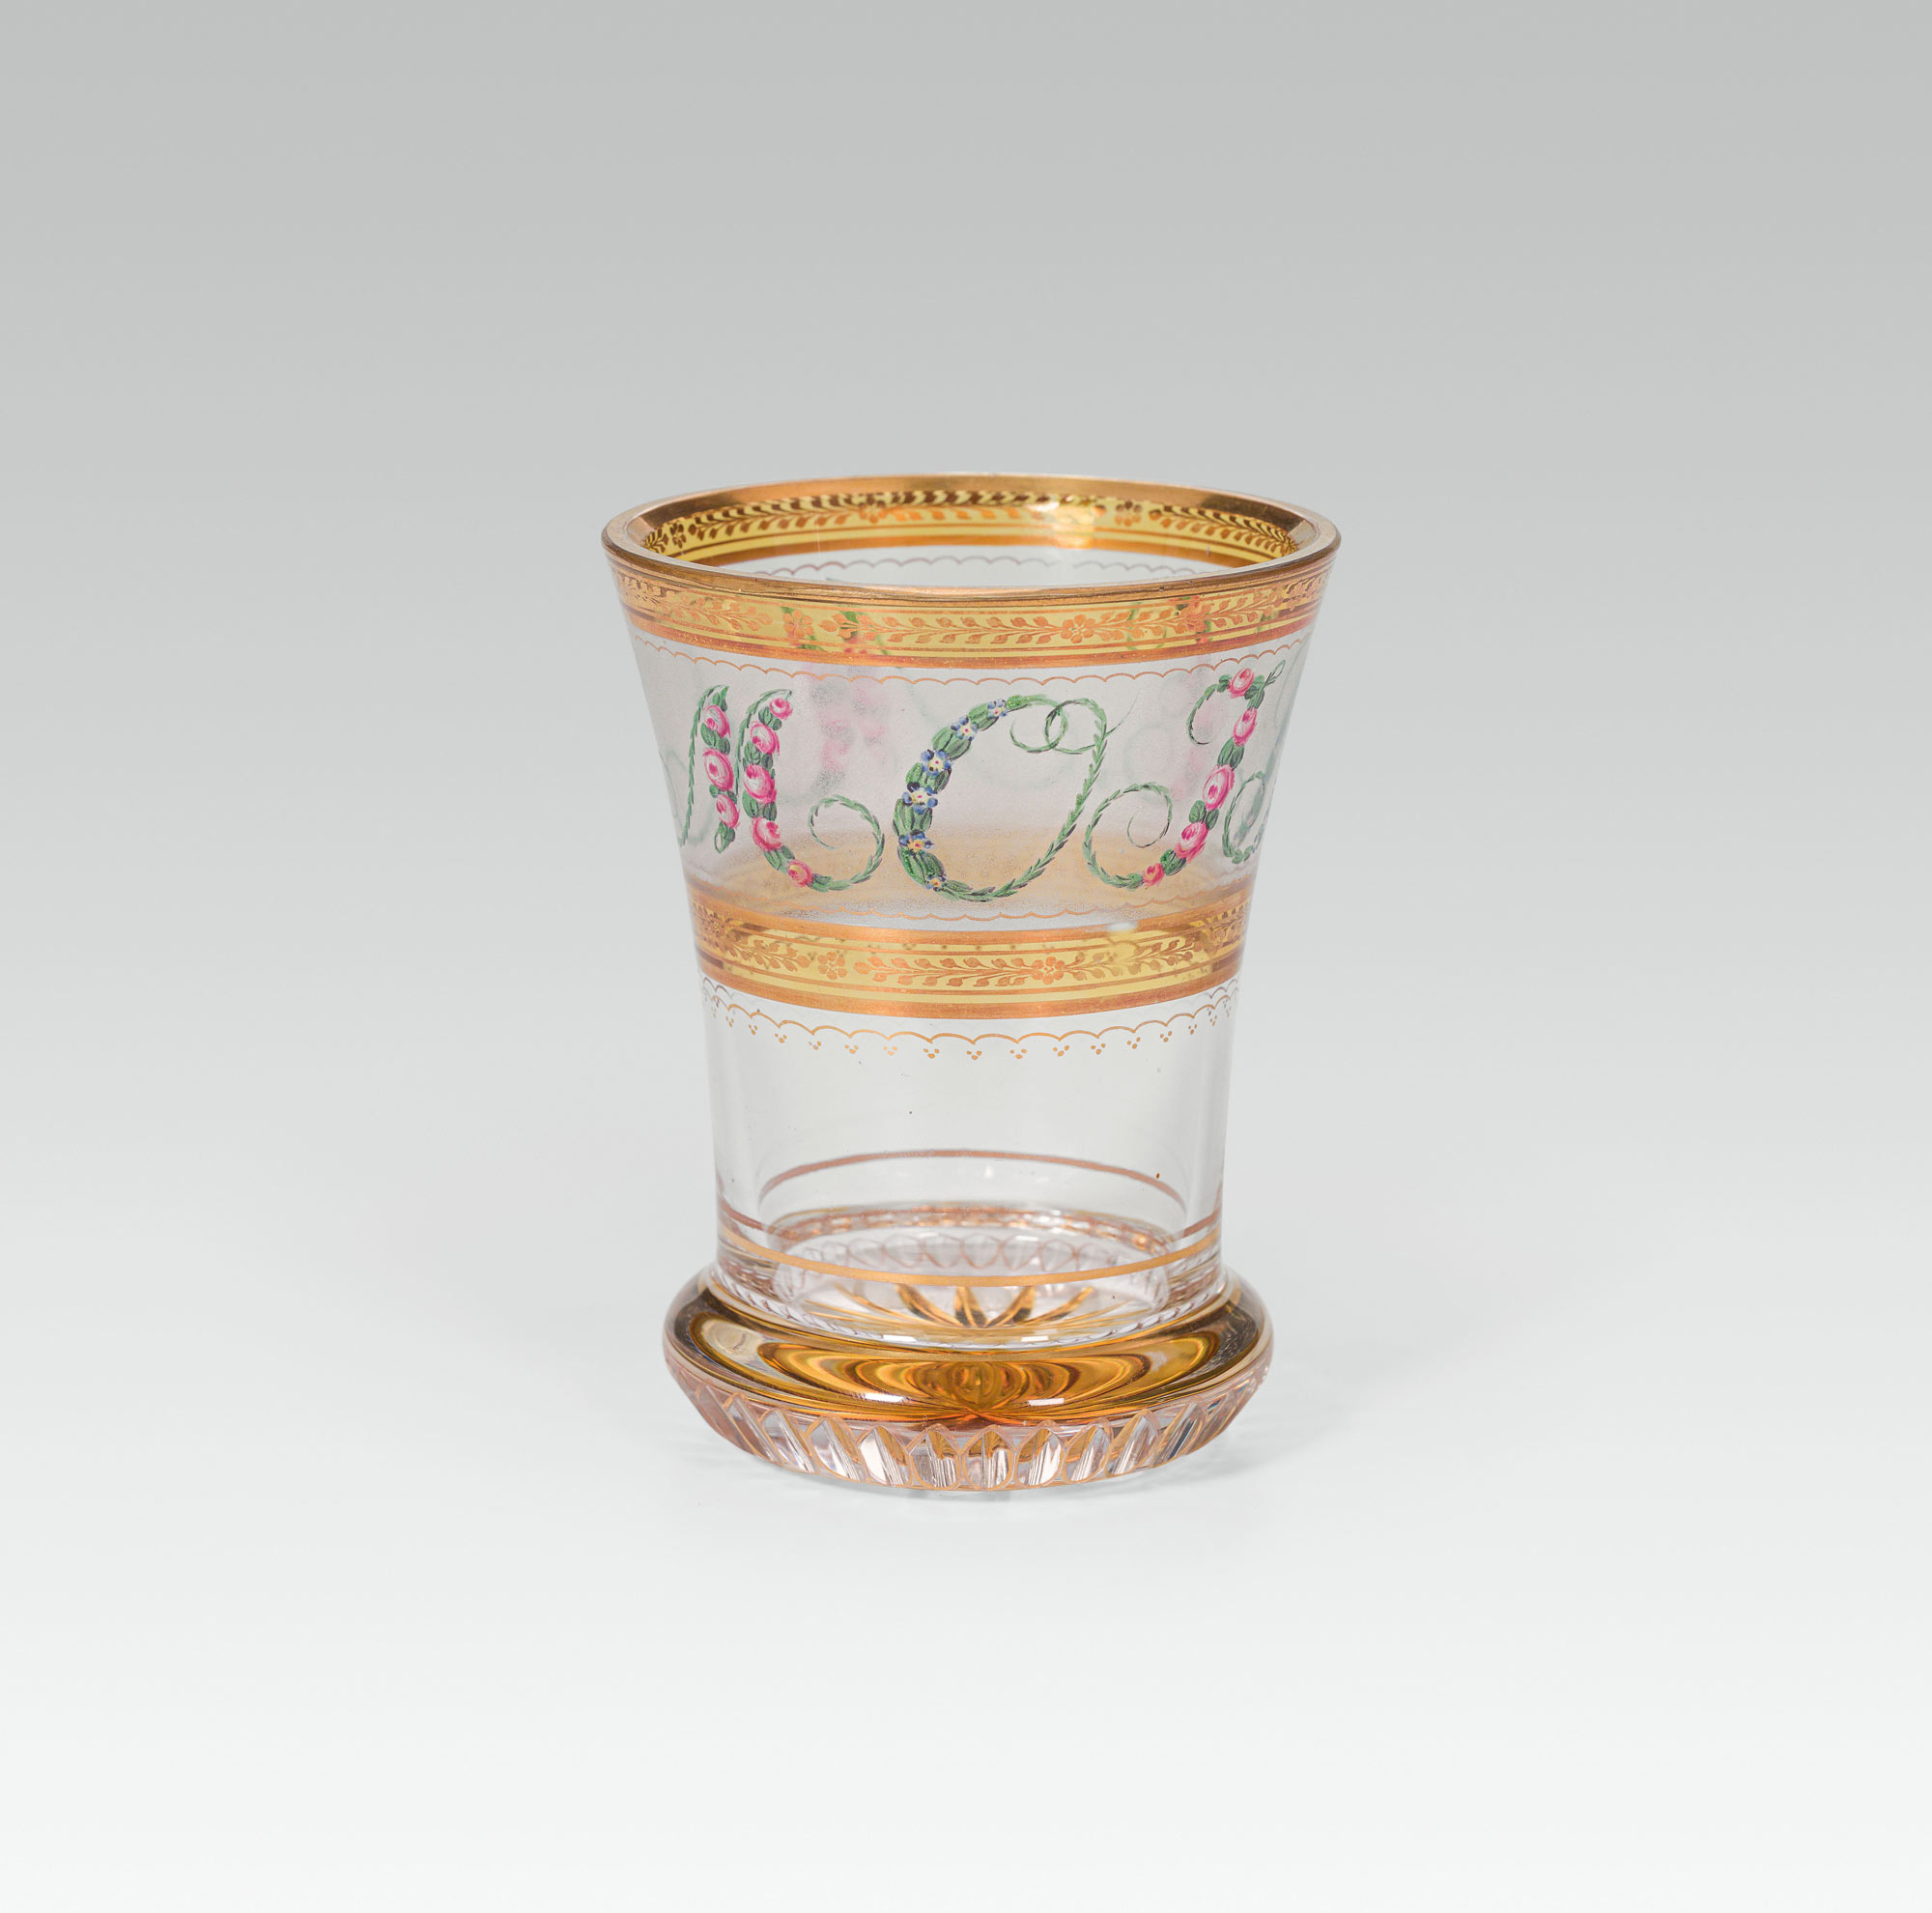 Anton KothgasserBeaker "Memoire"colourless glass, partly yellow stained, gold and transparent